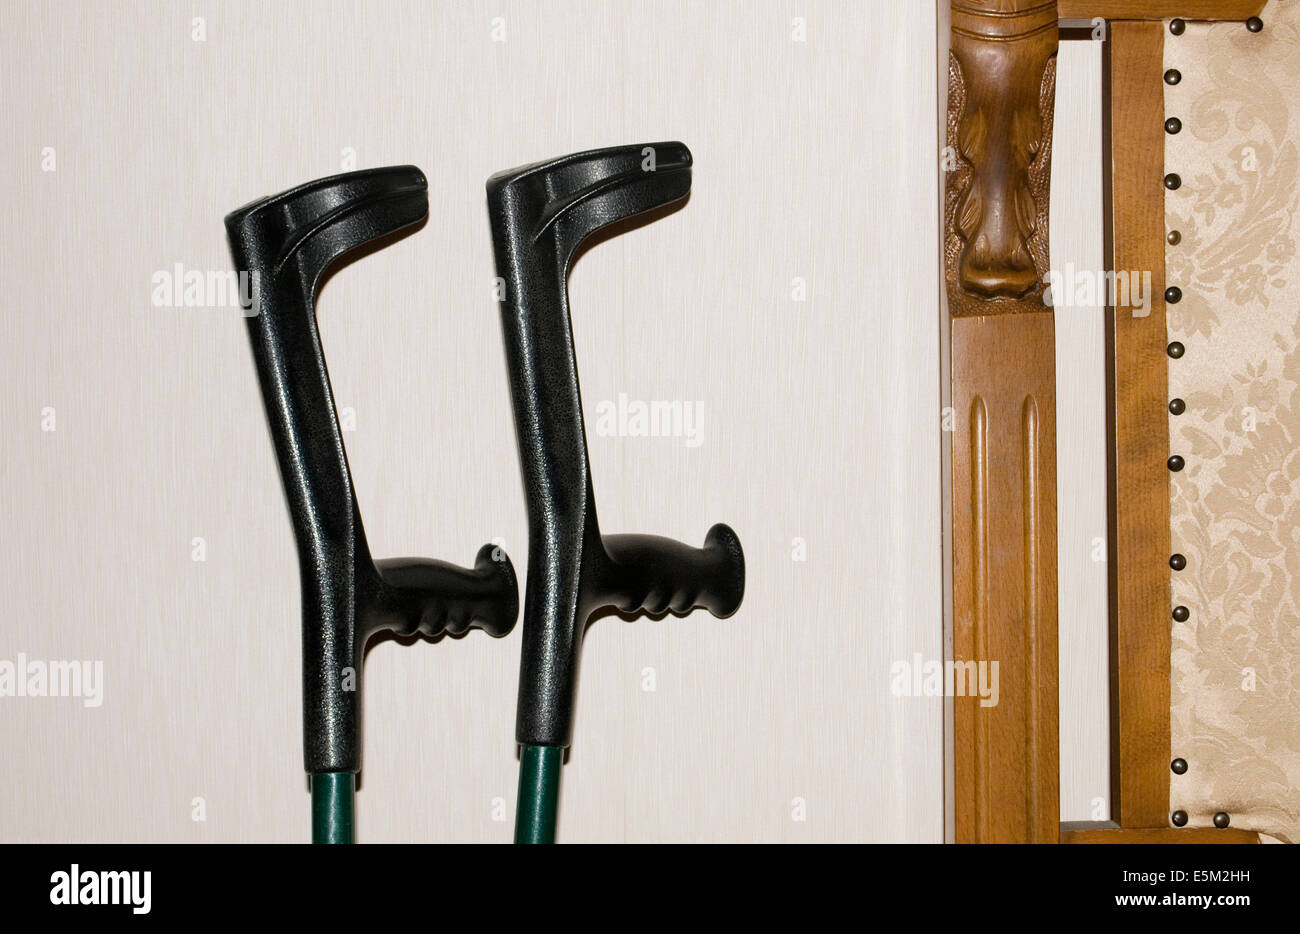 Pair of Crutches Leaning on Wall Stock Photo